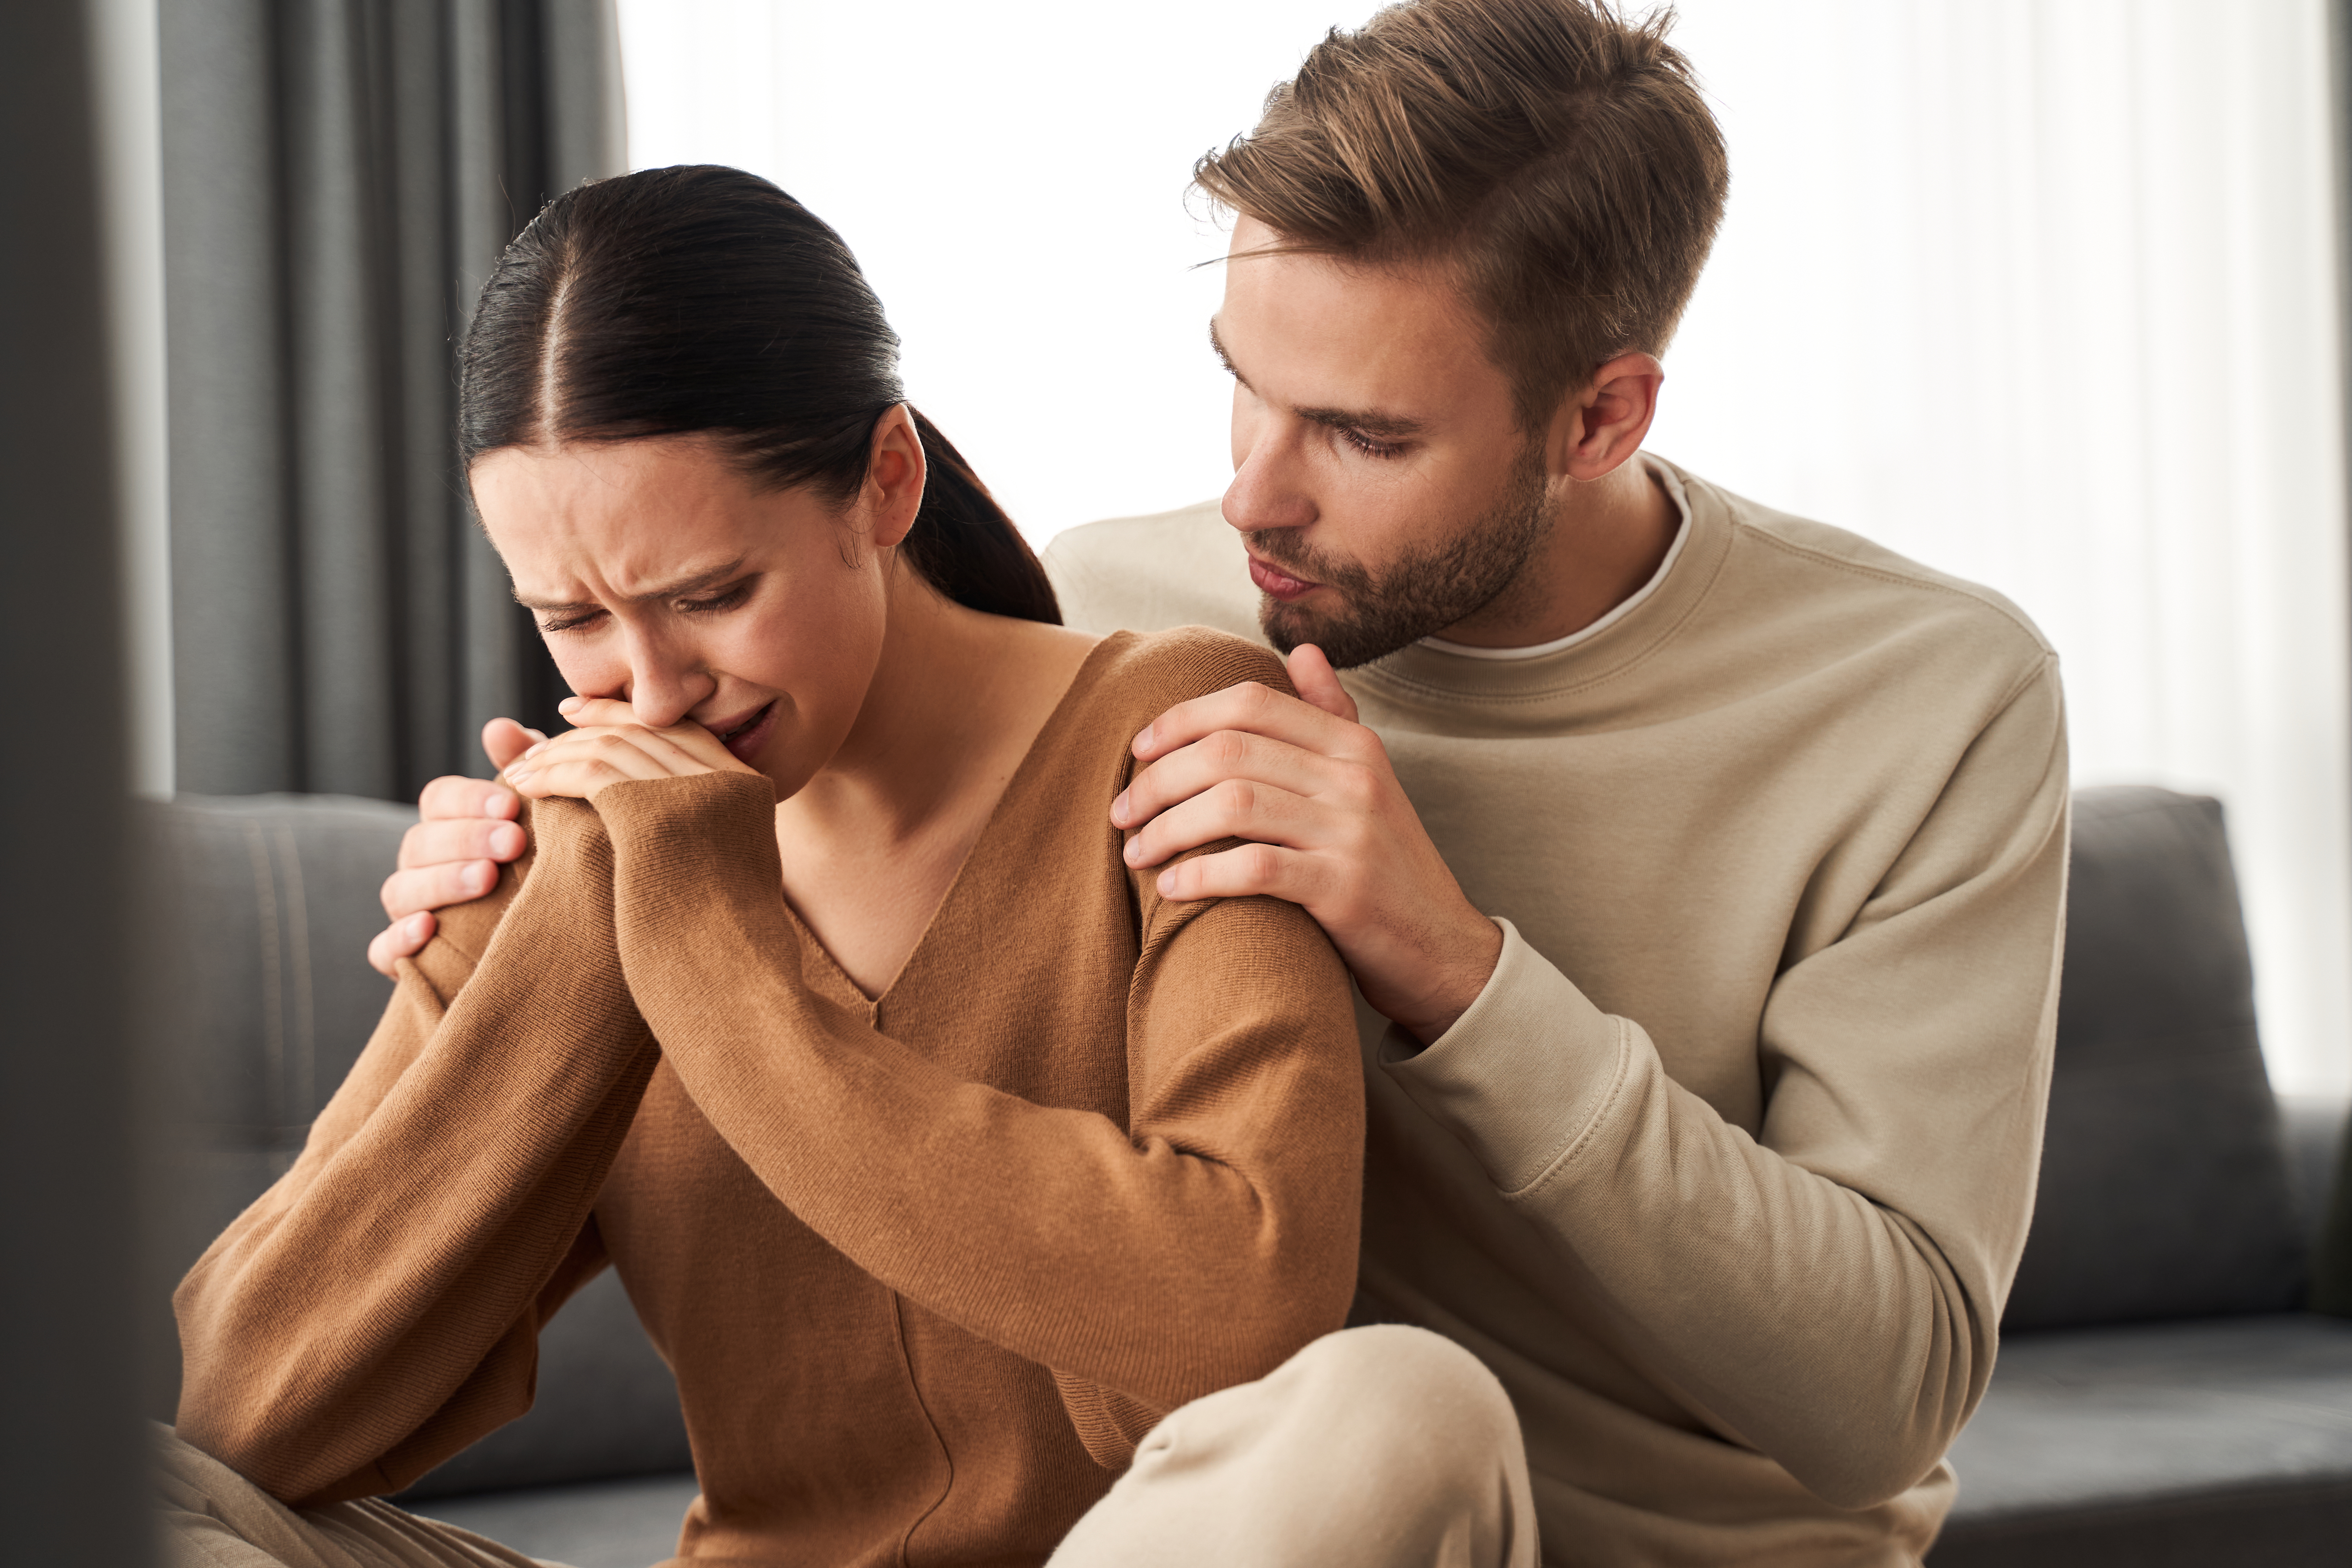 A husband trying to calm down his crying wife | Source: Shutterstock